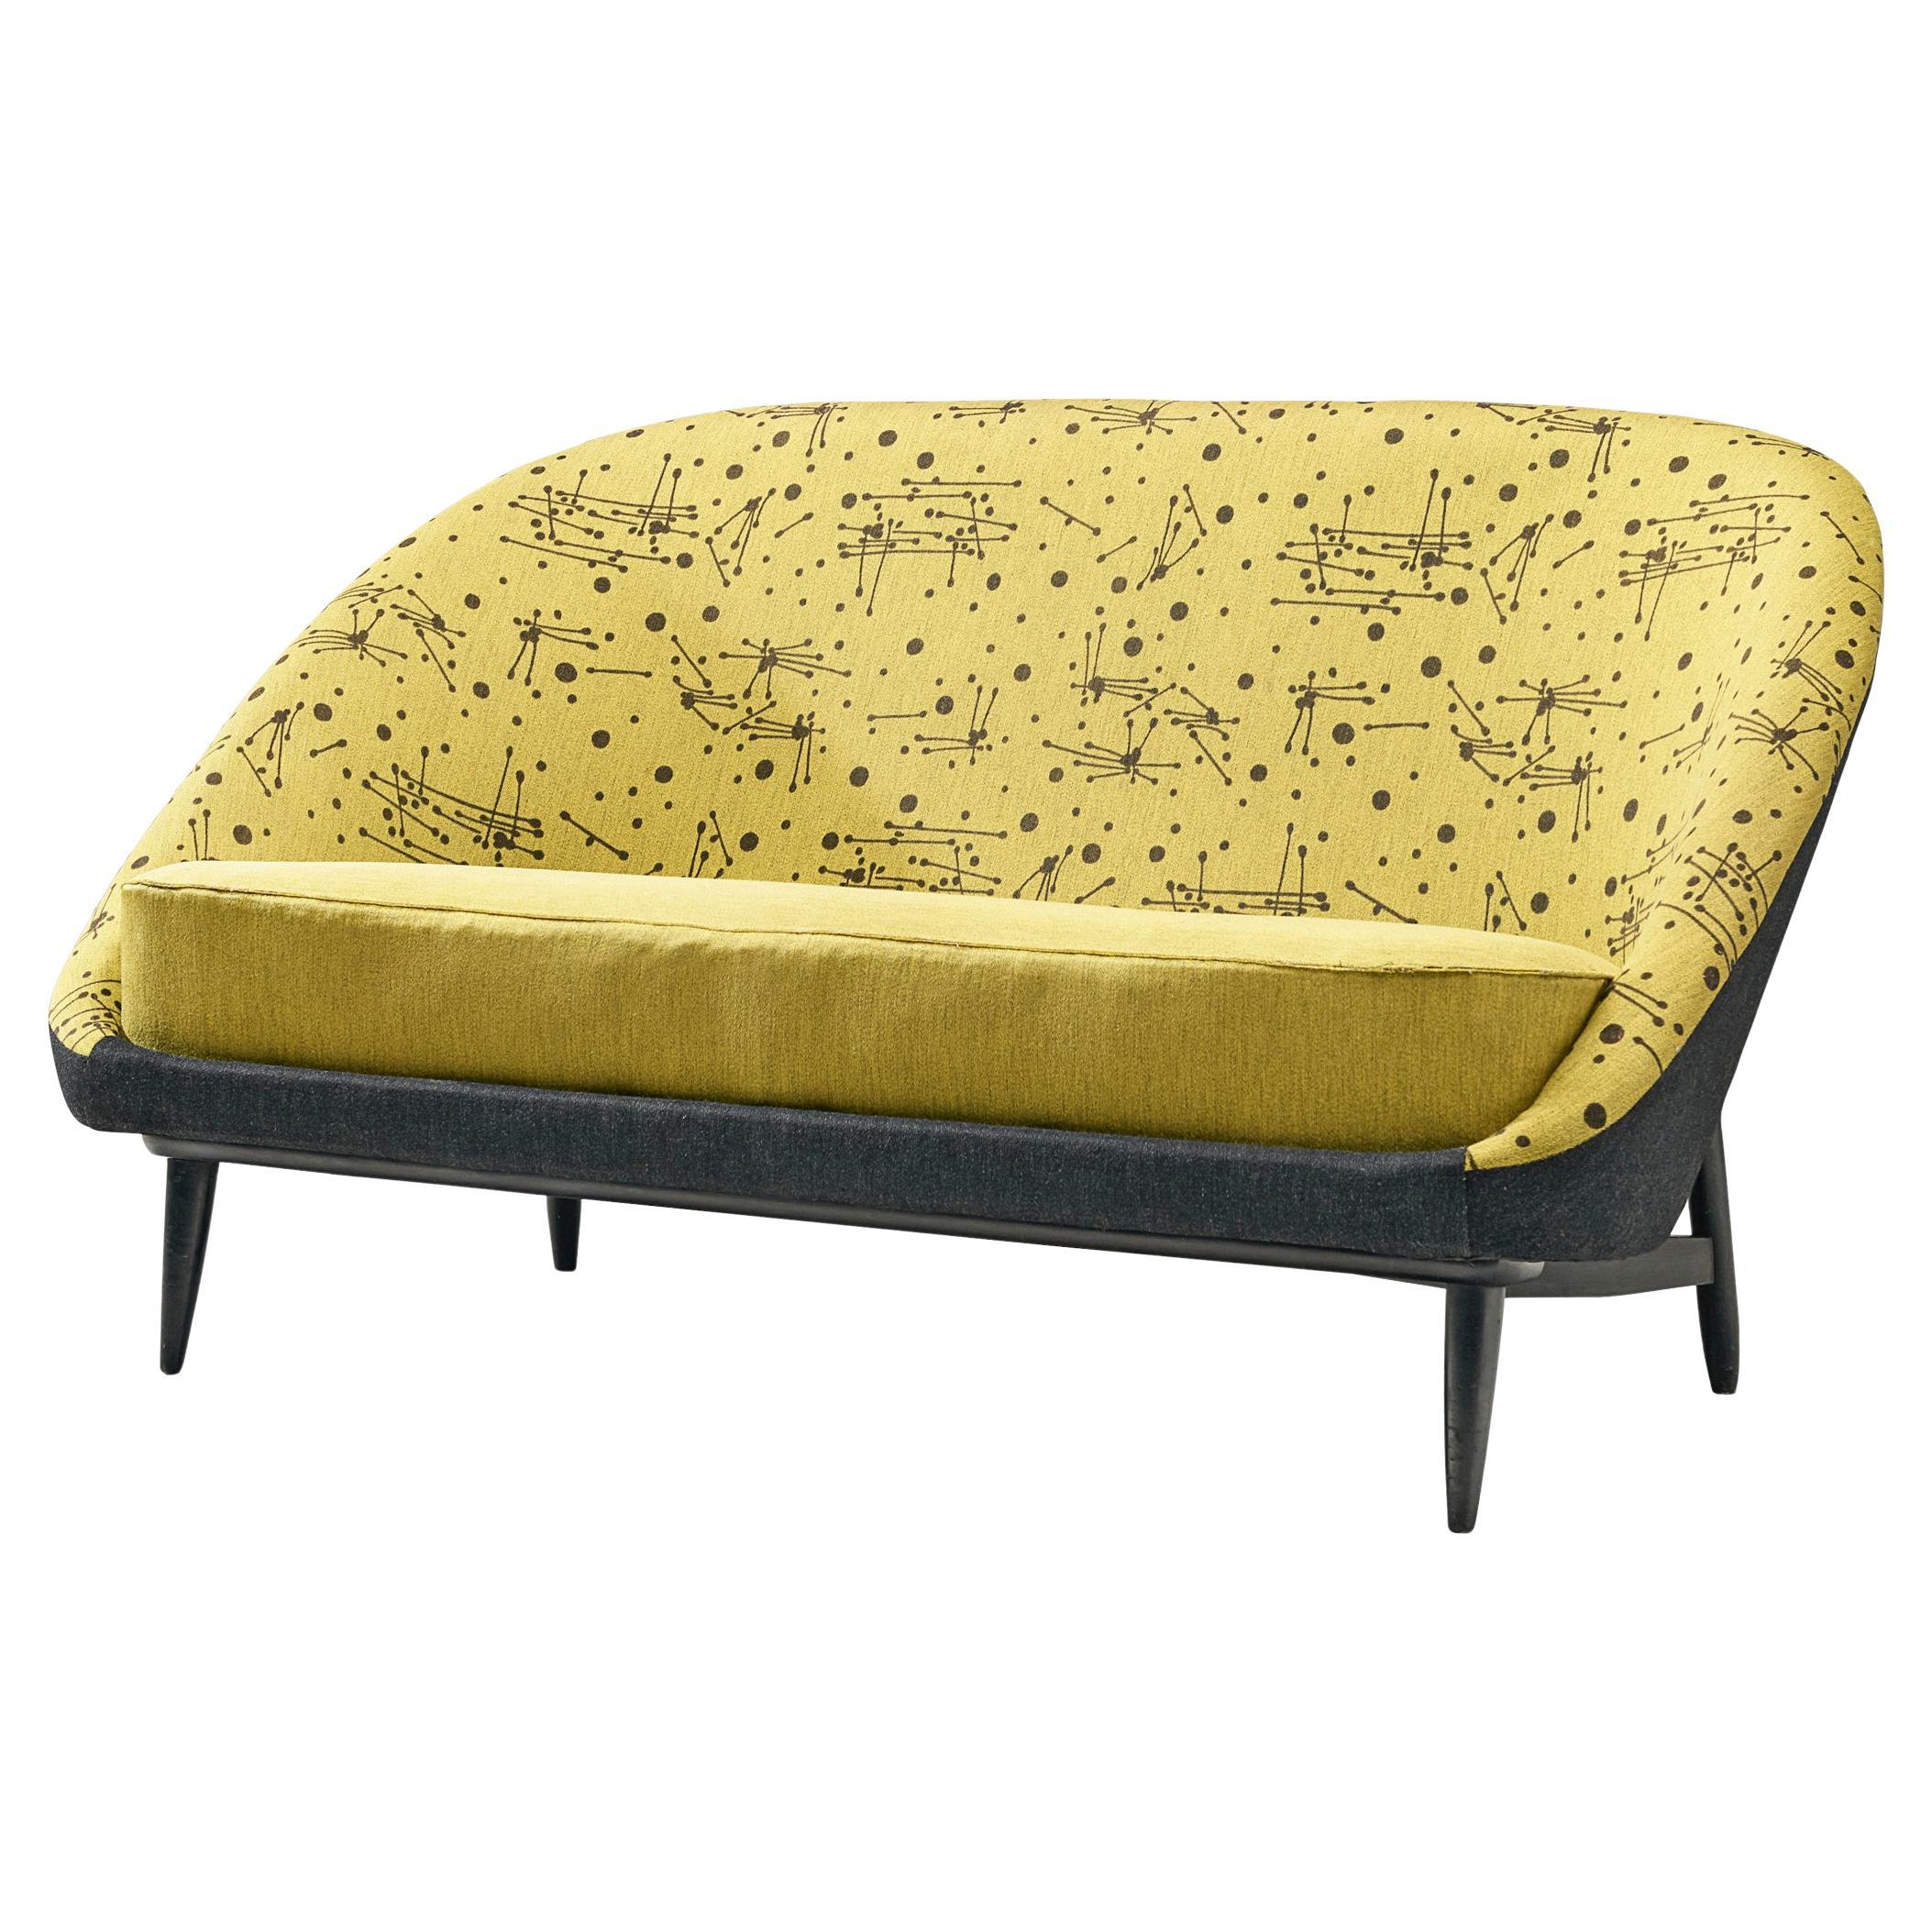 Theo Ruth for Artifort Sofa in Yellow and Black Upholstery  For Sale